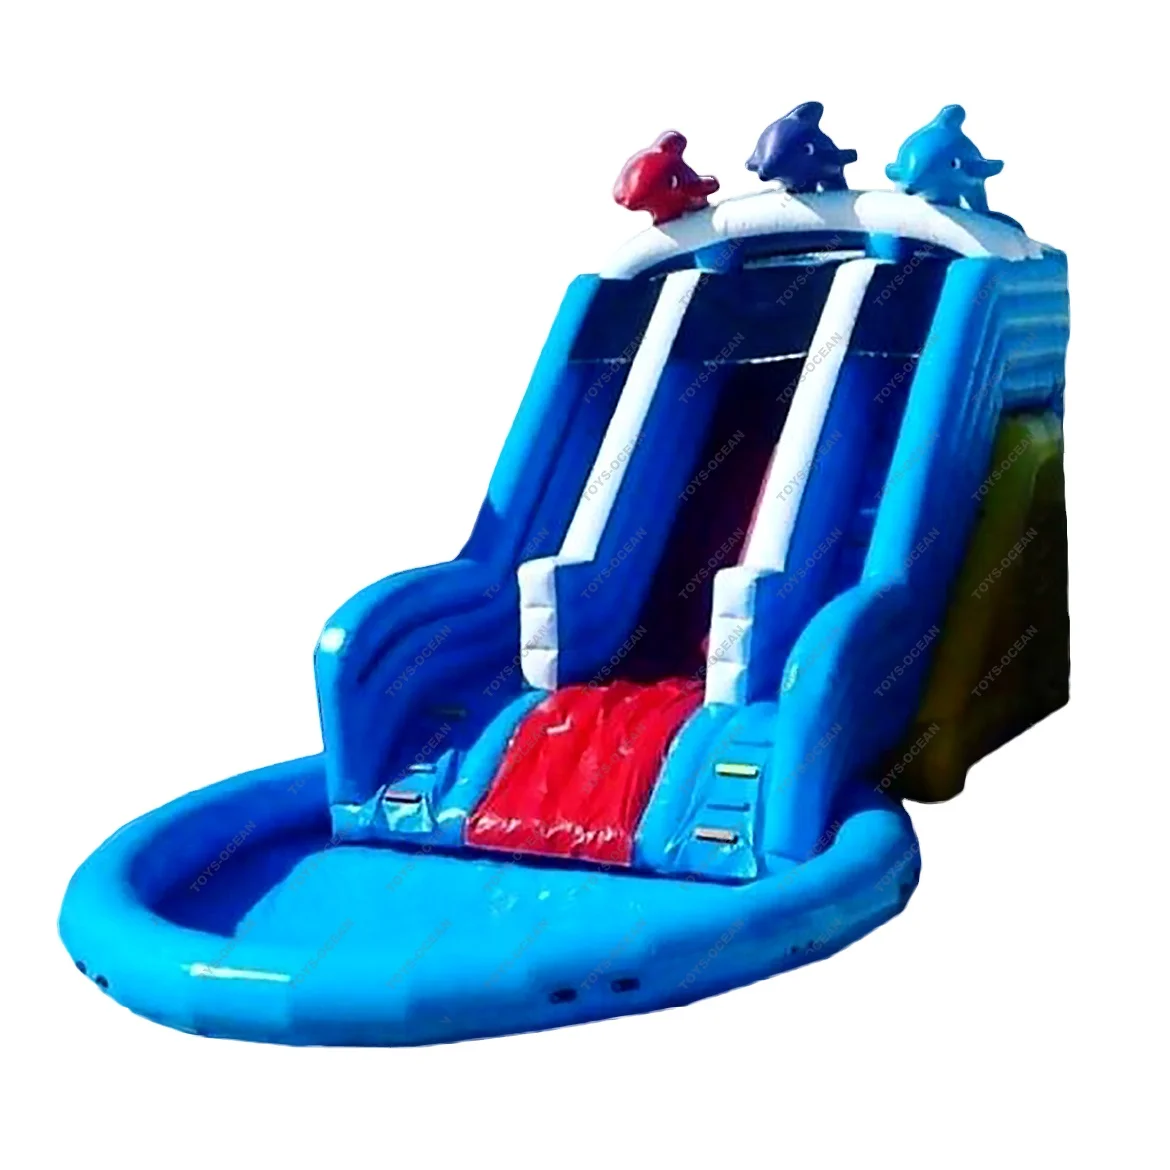 

2022 new Outdoor Commercial Rental Inflatable Water Slide with Pool for Kids